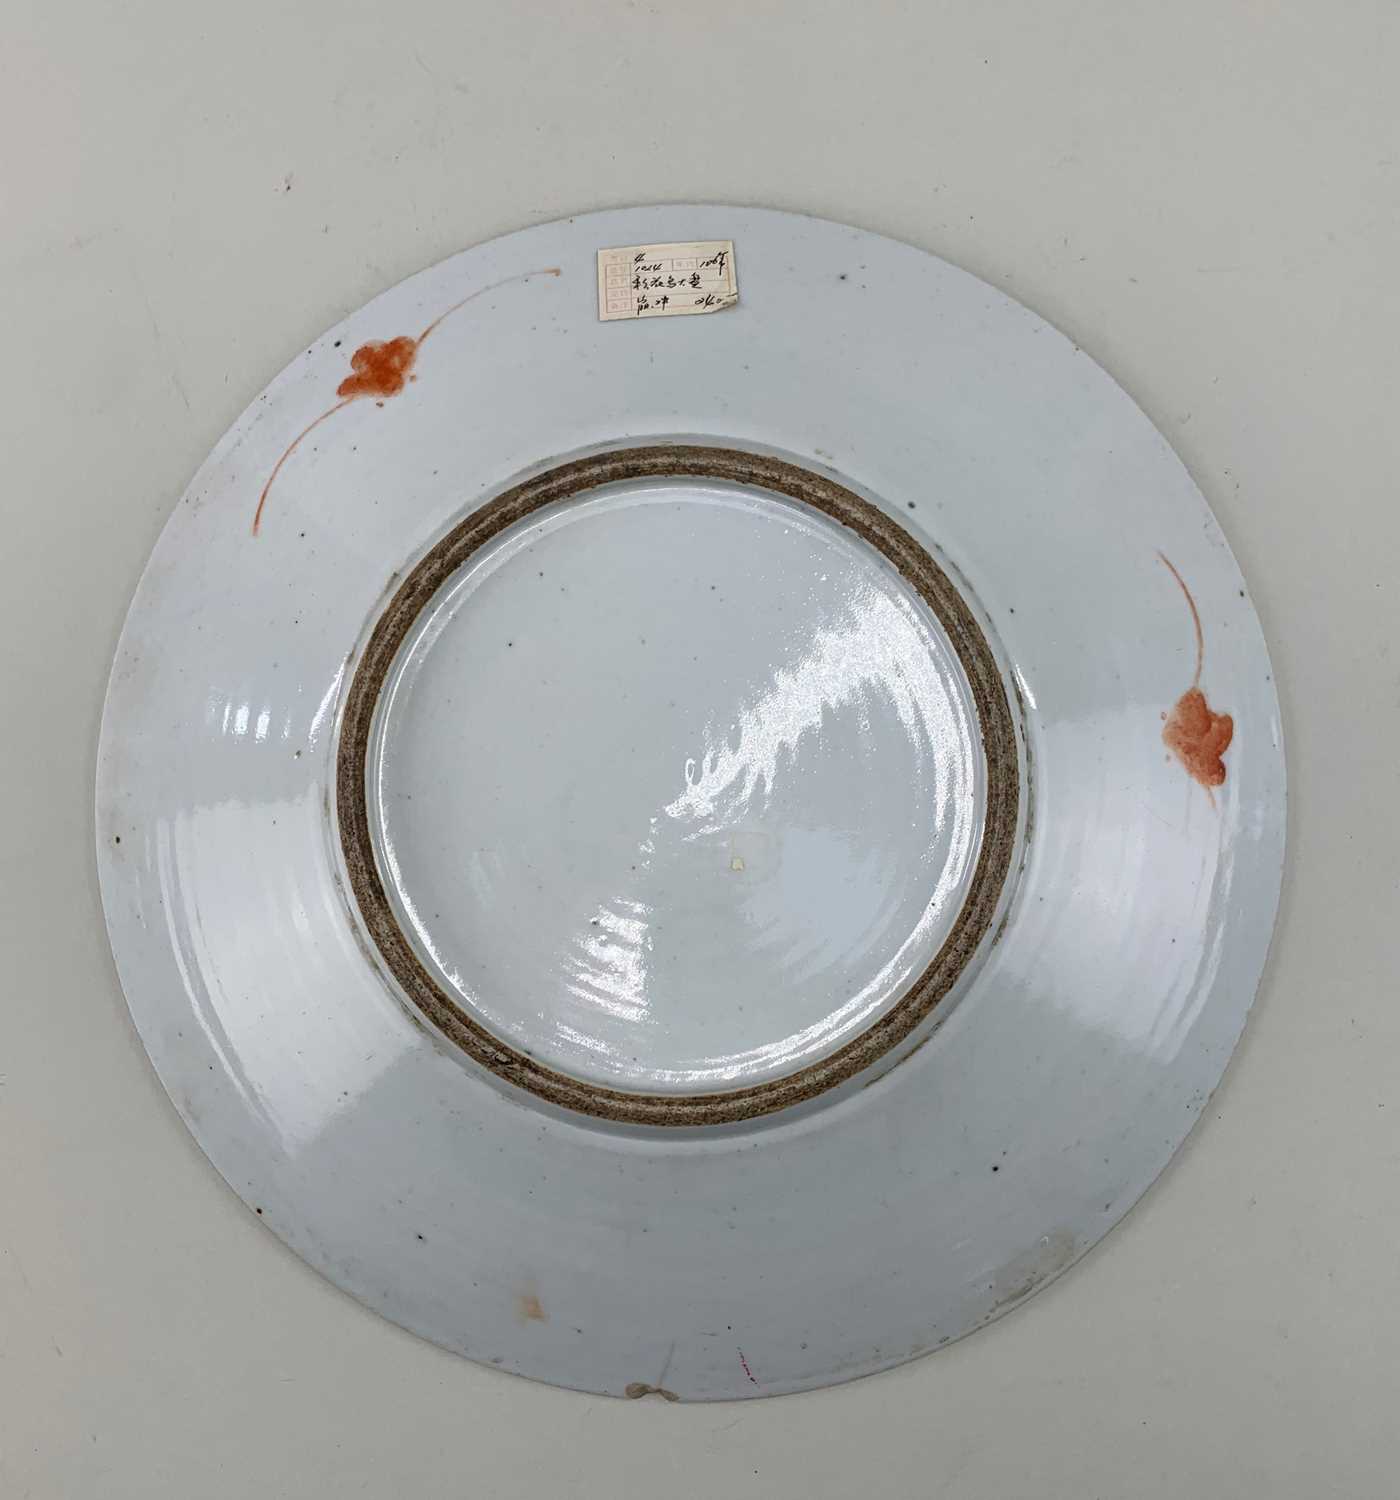 PROVINCIAL CHINESE FAMILLE ROSE PORCELAIN DISH, Republic or later, painted with two song birds - Image 3 of 4